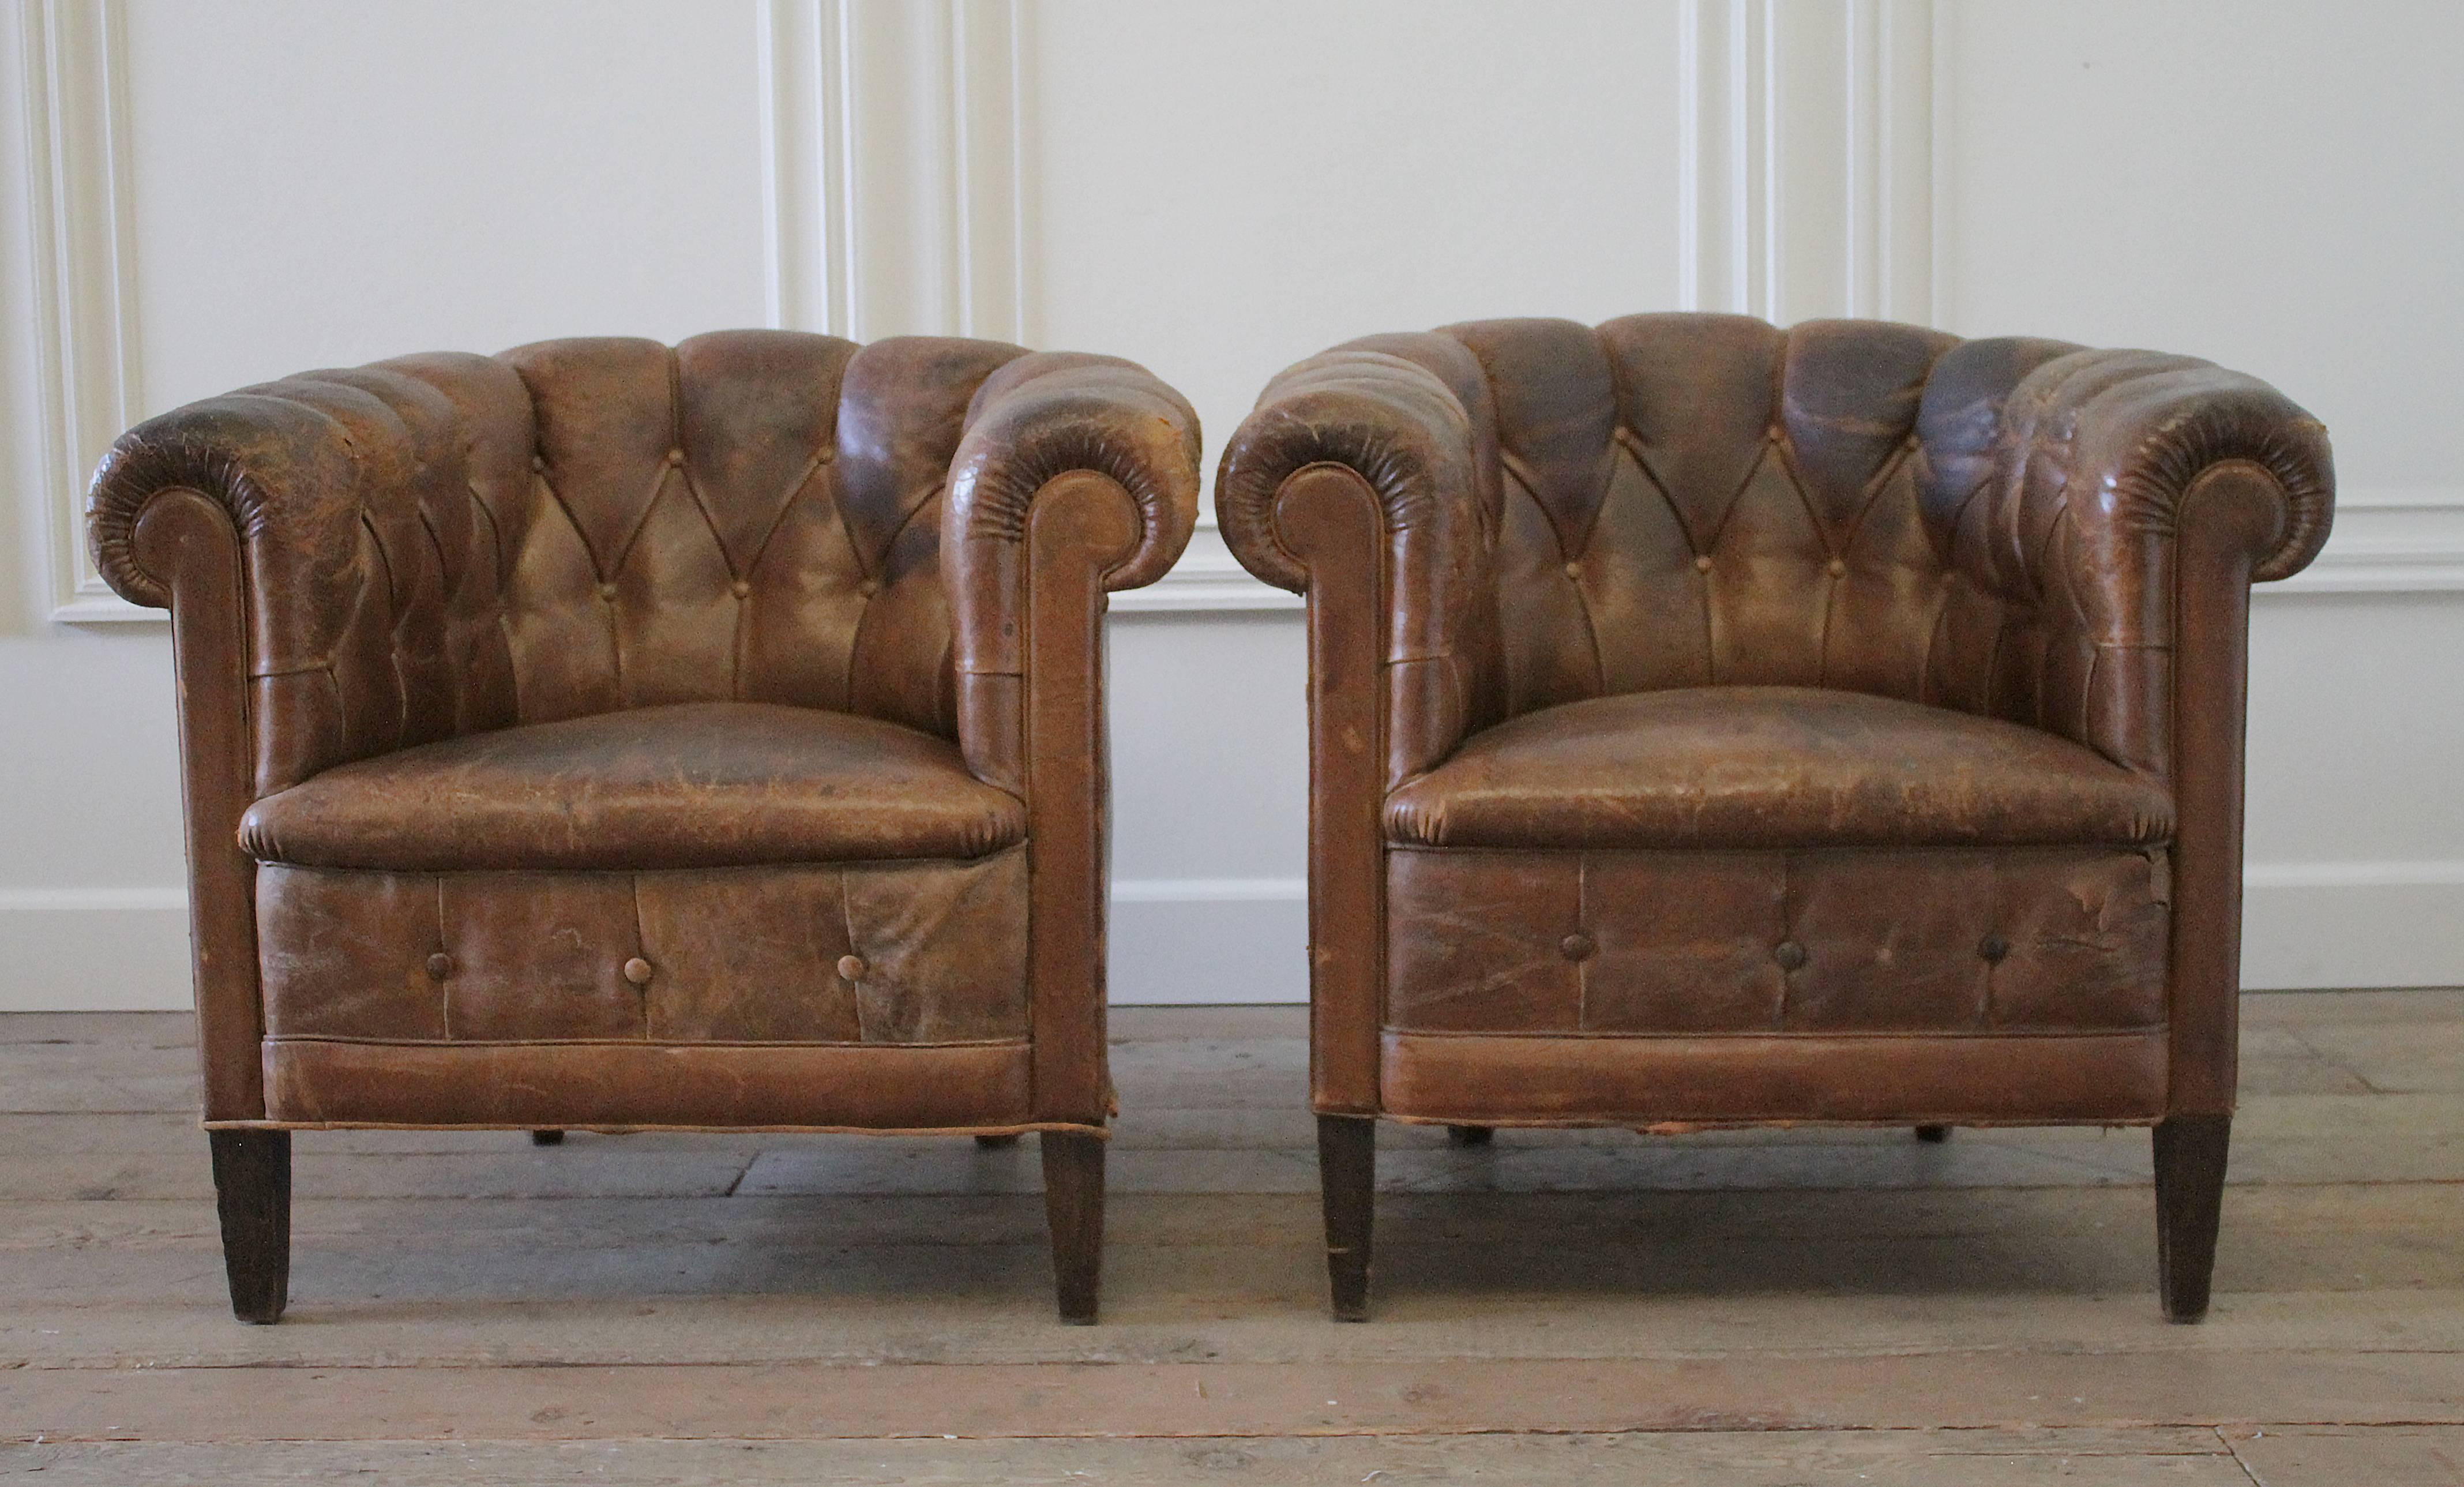 These French leather tub chairs have the original lambskin leather, that is very distressed and aged, circa 1930. The frames are in good condition, and are sturdy, the seats sit nicely, just some of the leather around the outside arms and back have